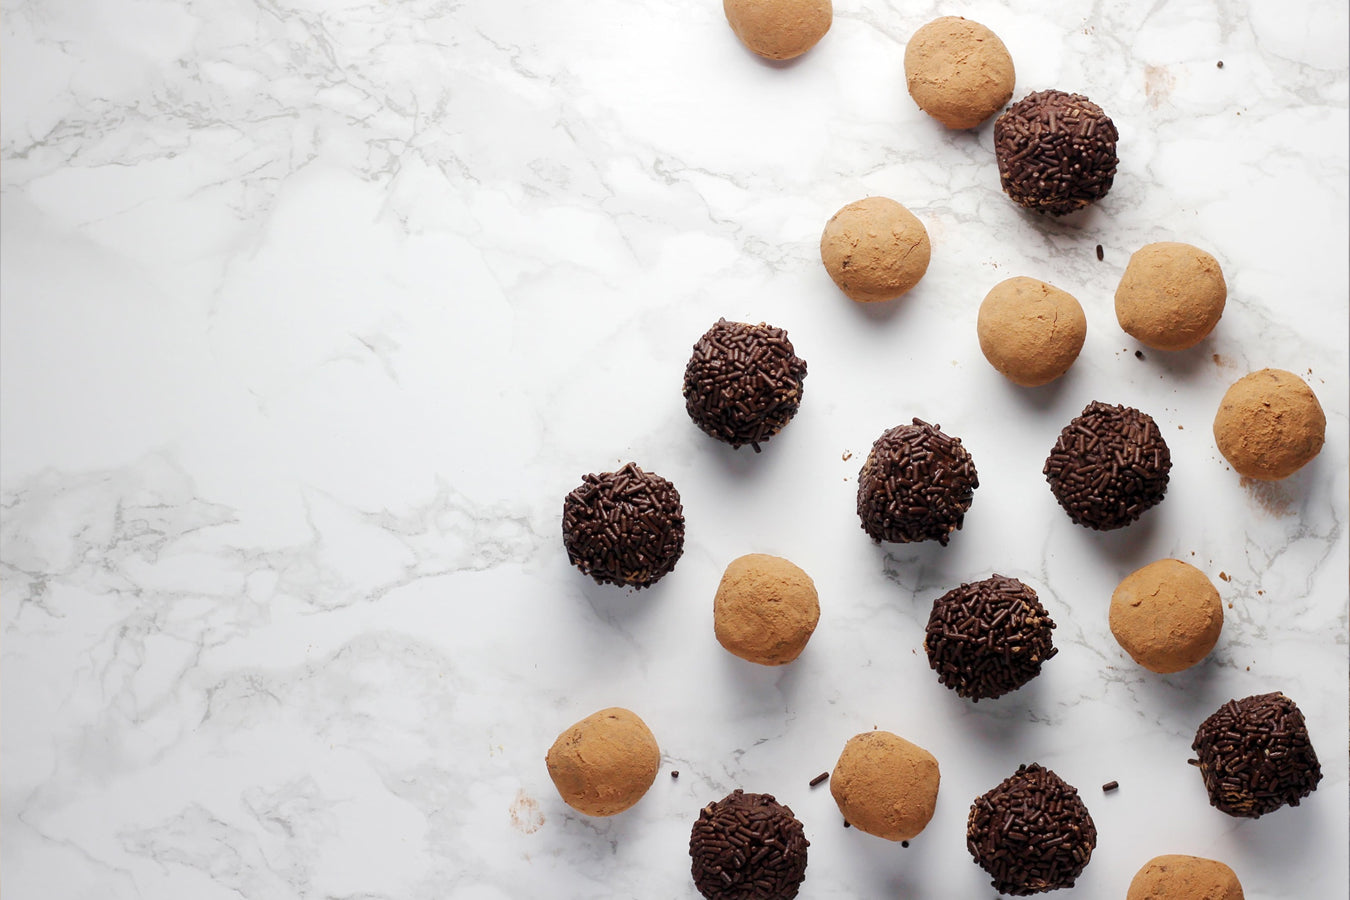 Cooking With CBD - Chocolate Truffles